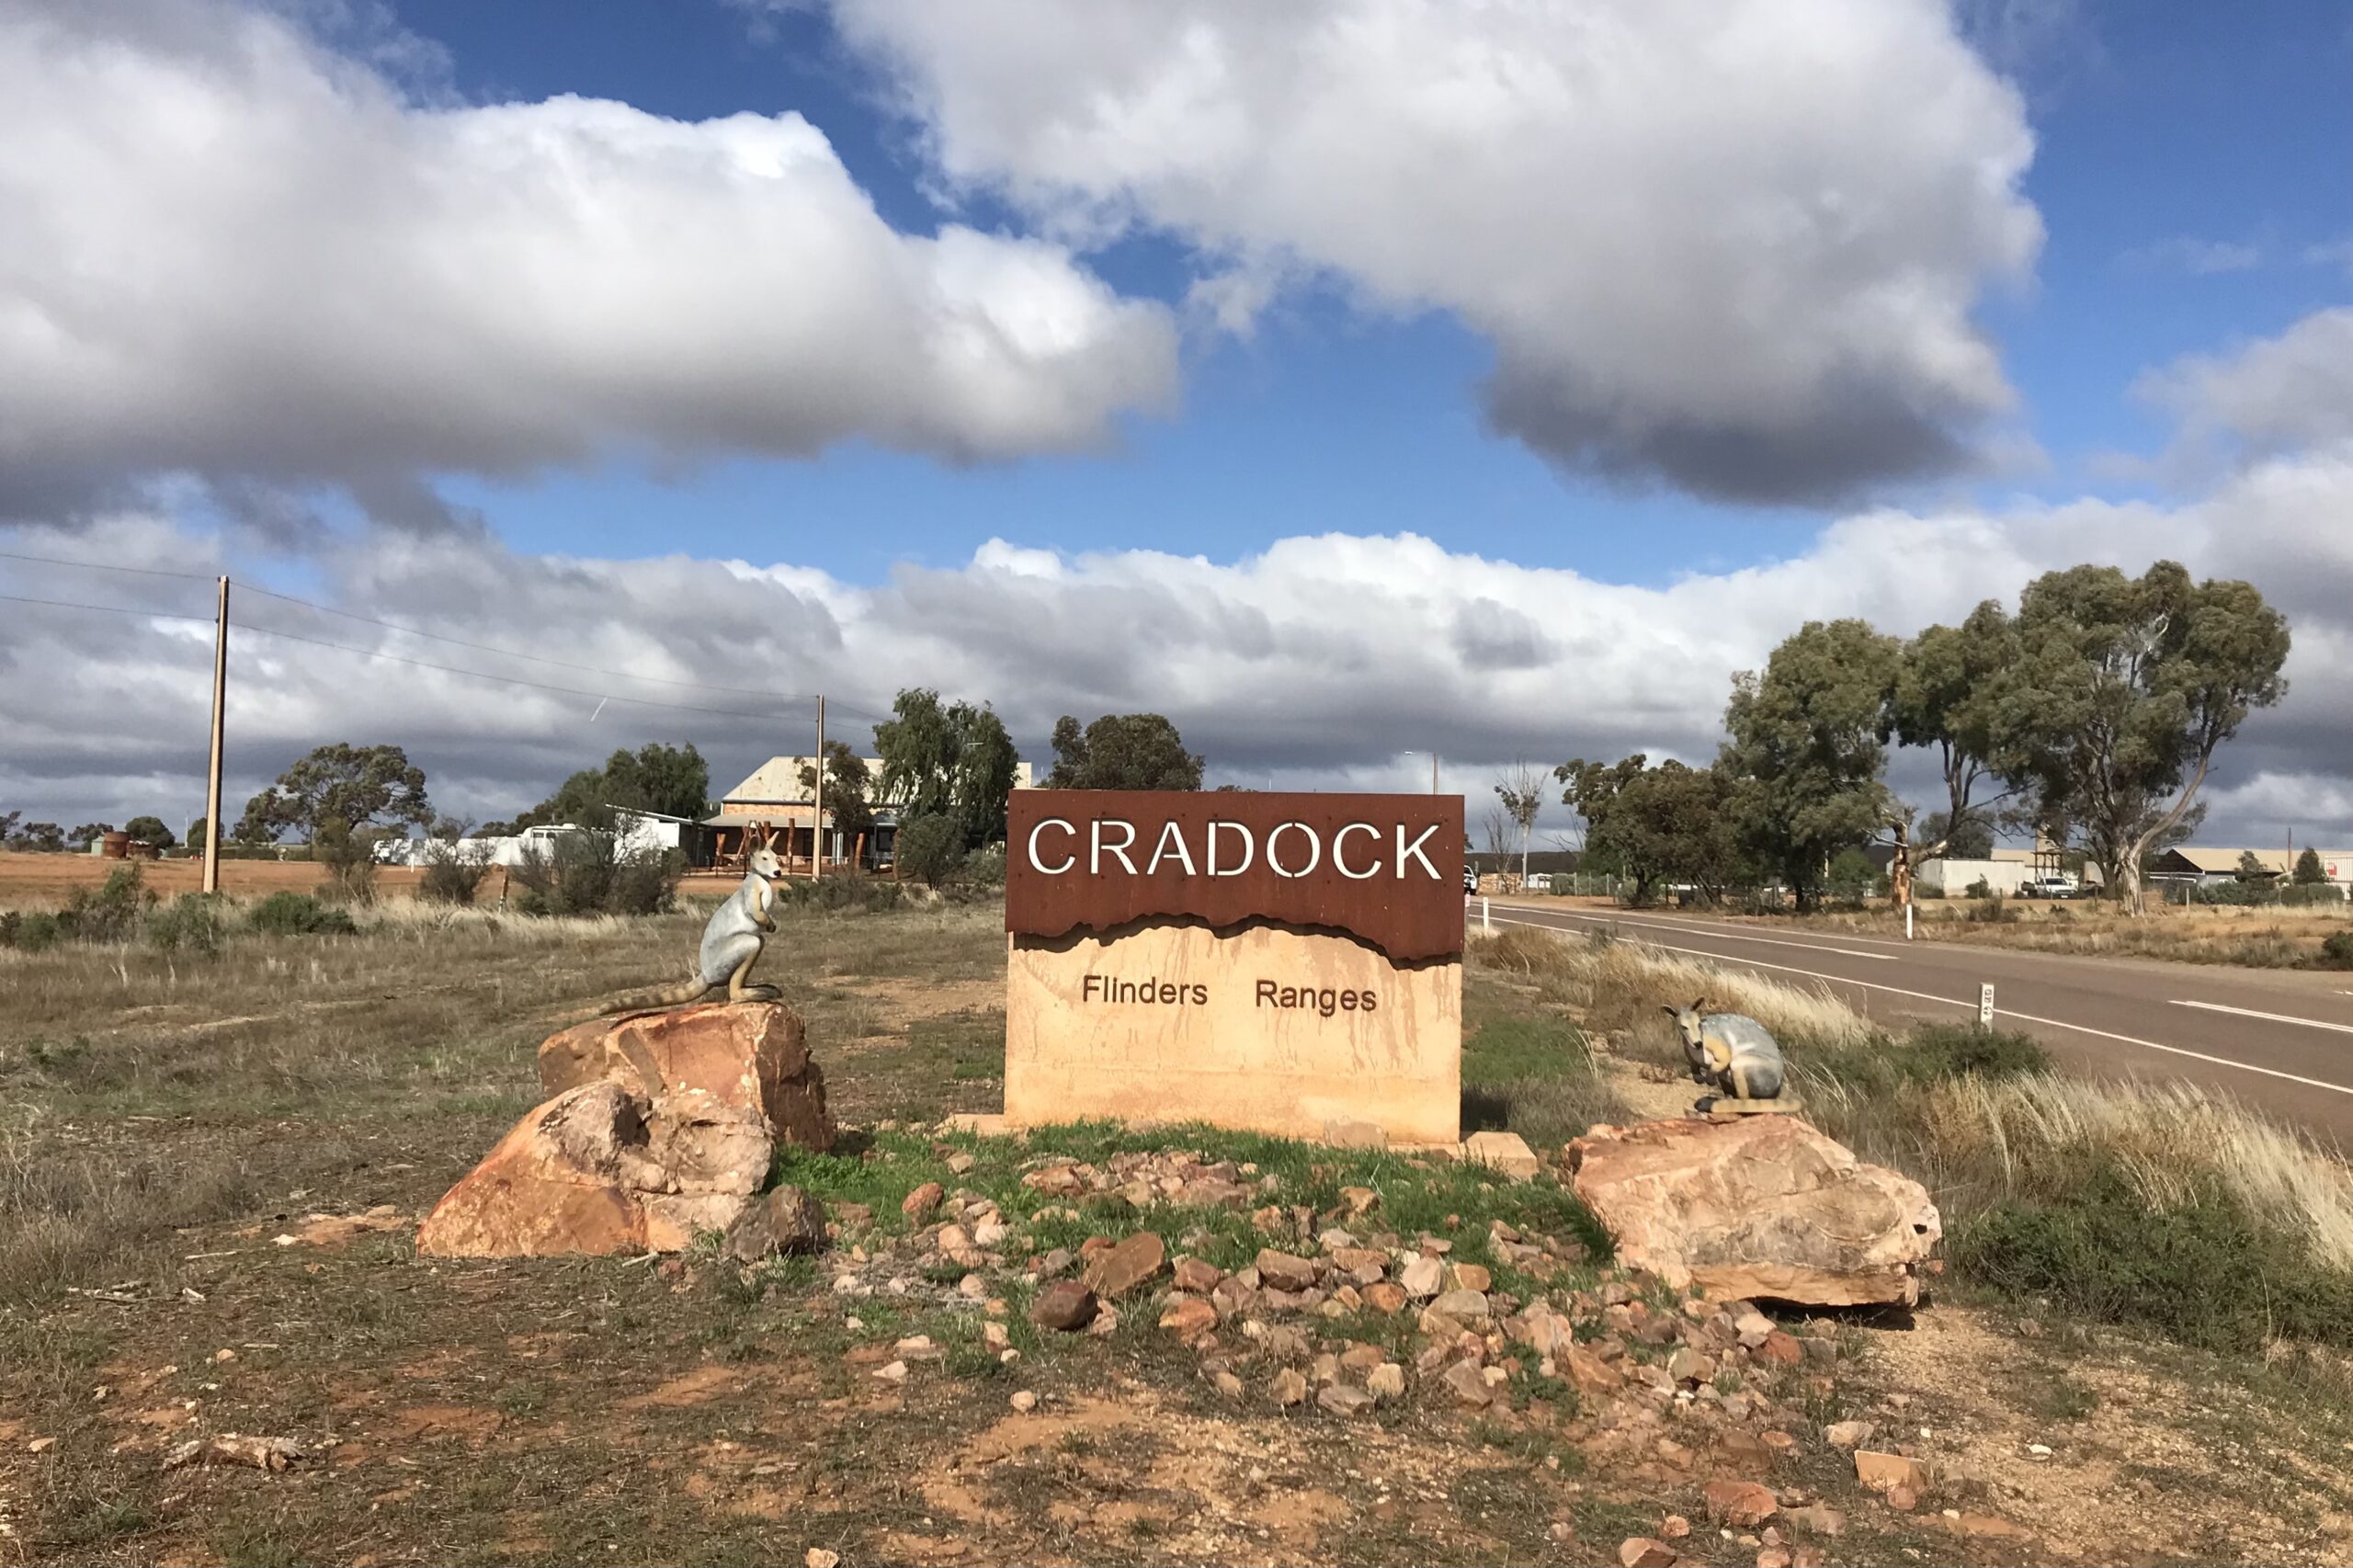 From the one pub town of Craddock – nothing else here